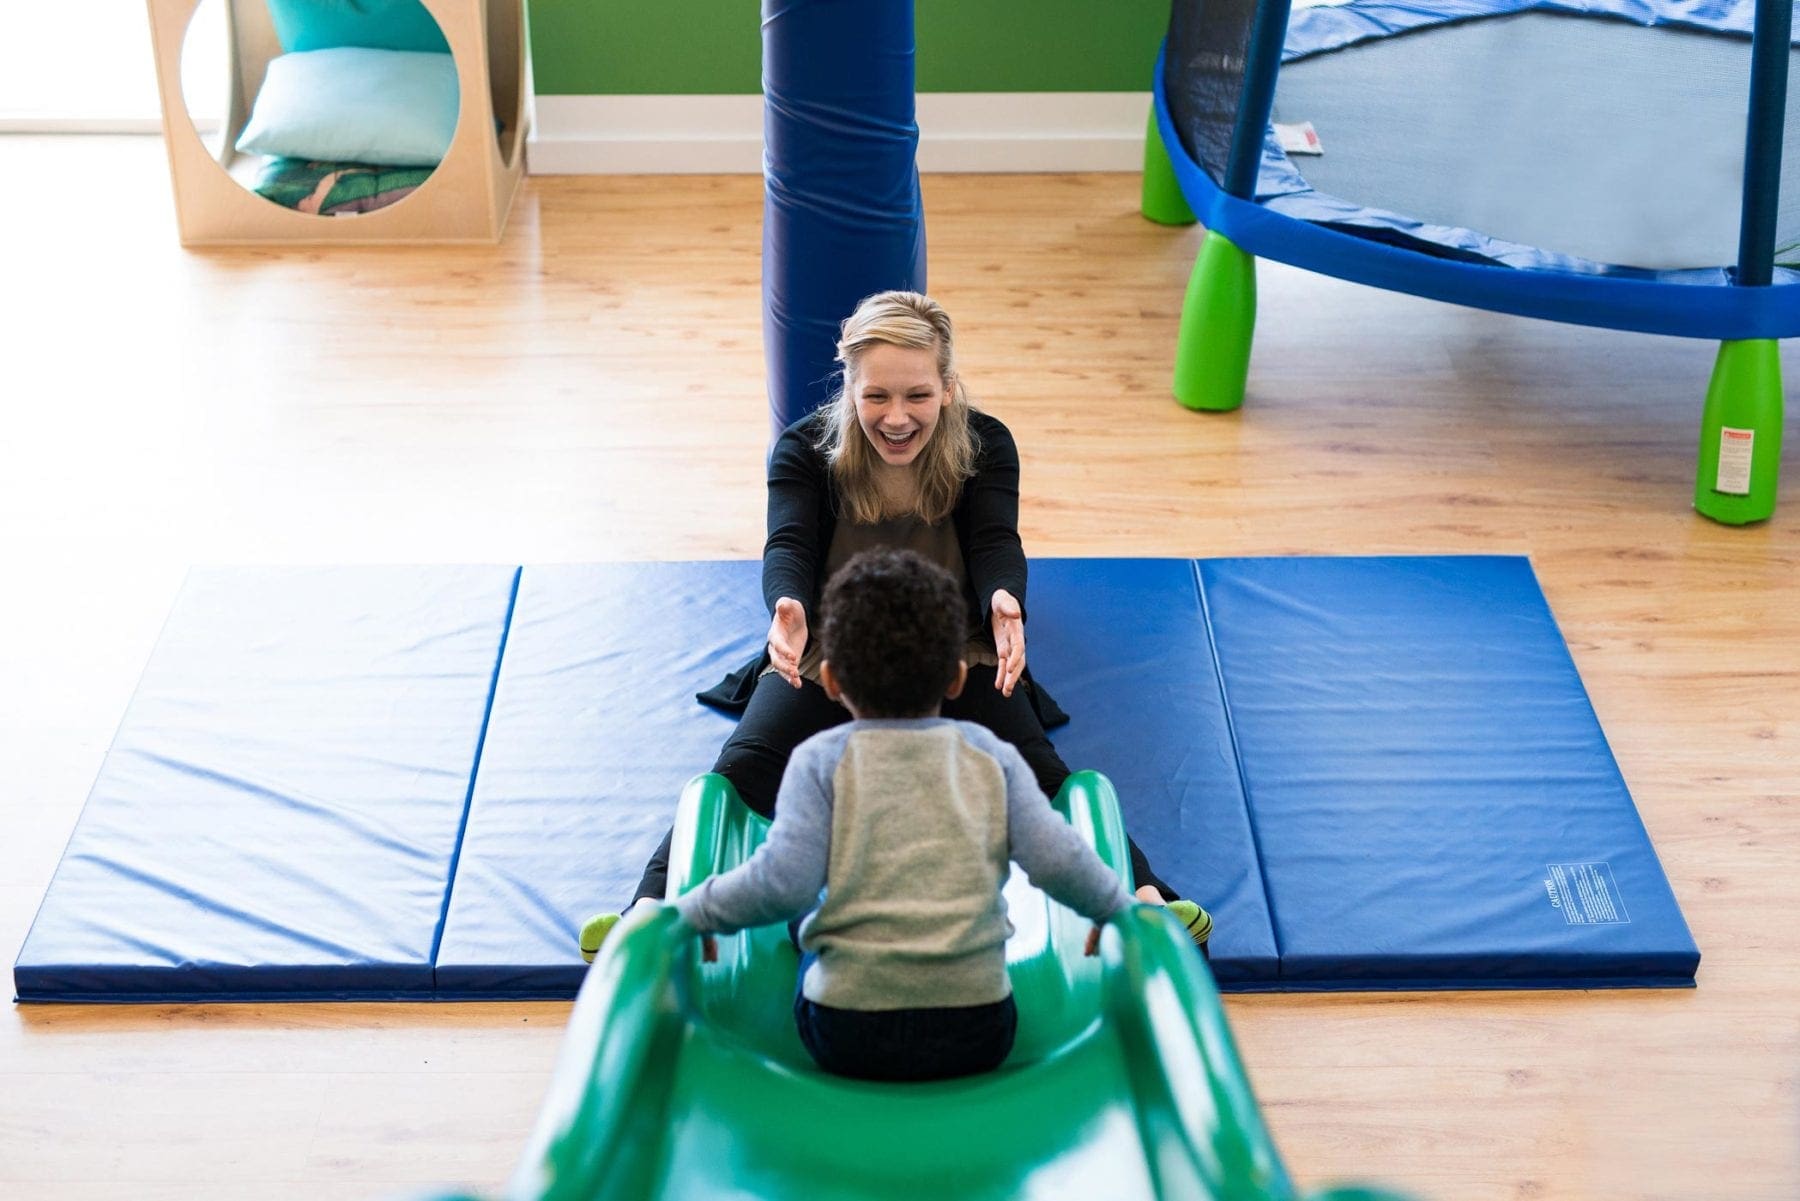 An ABA Therapy Session in our Sensory Gym